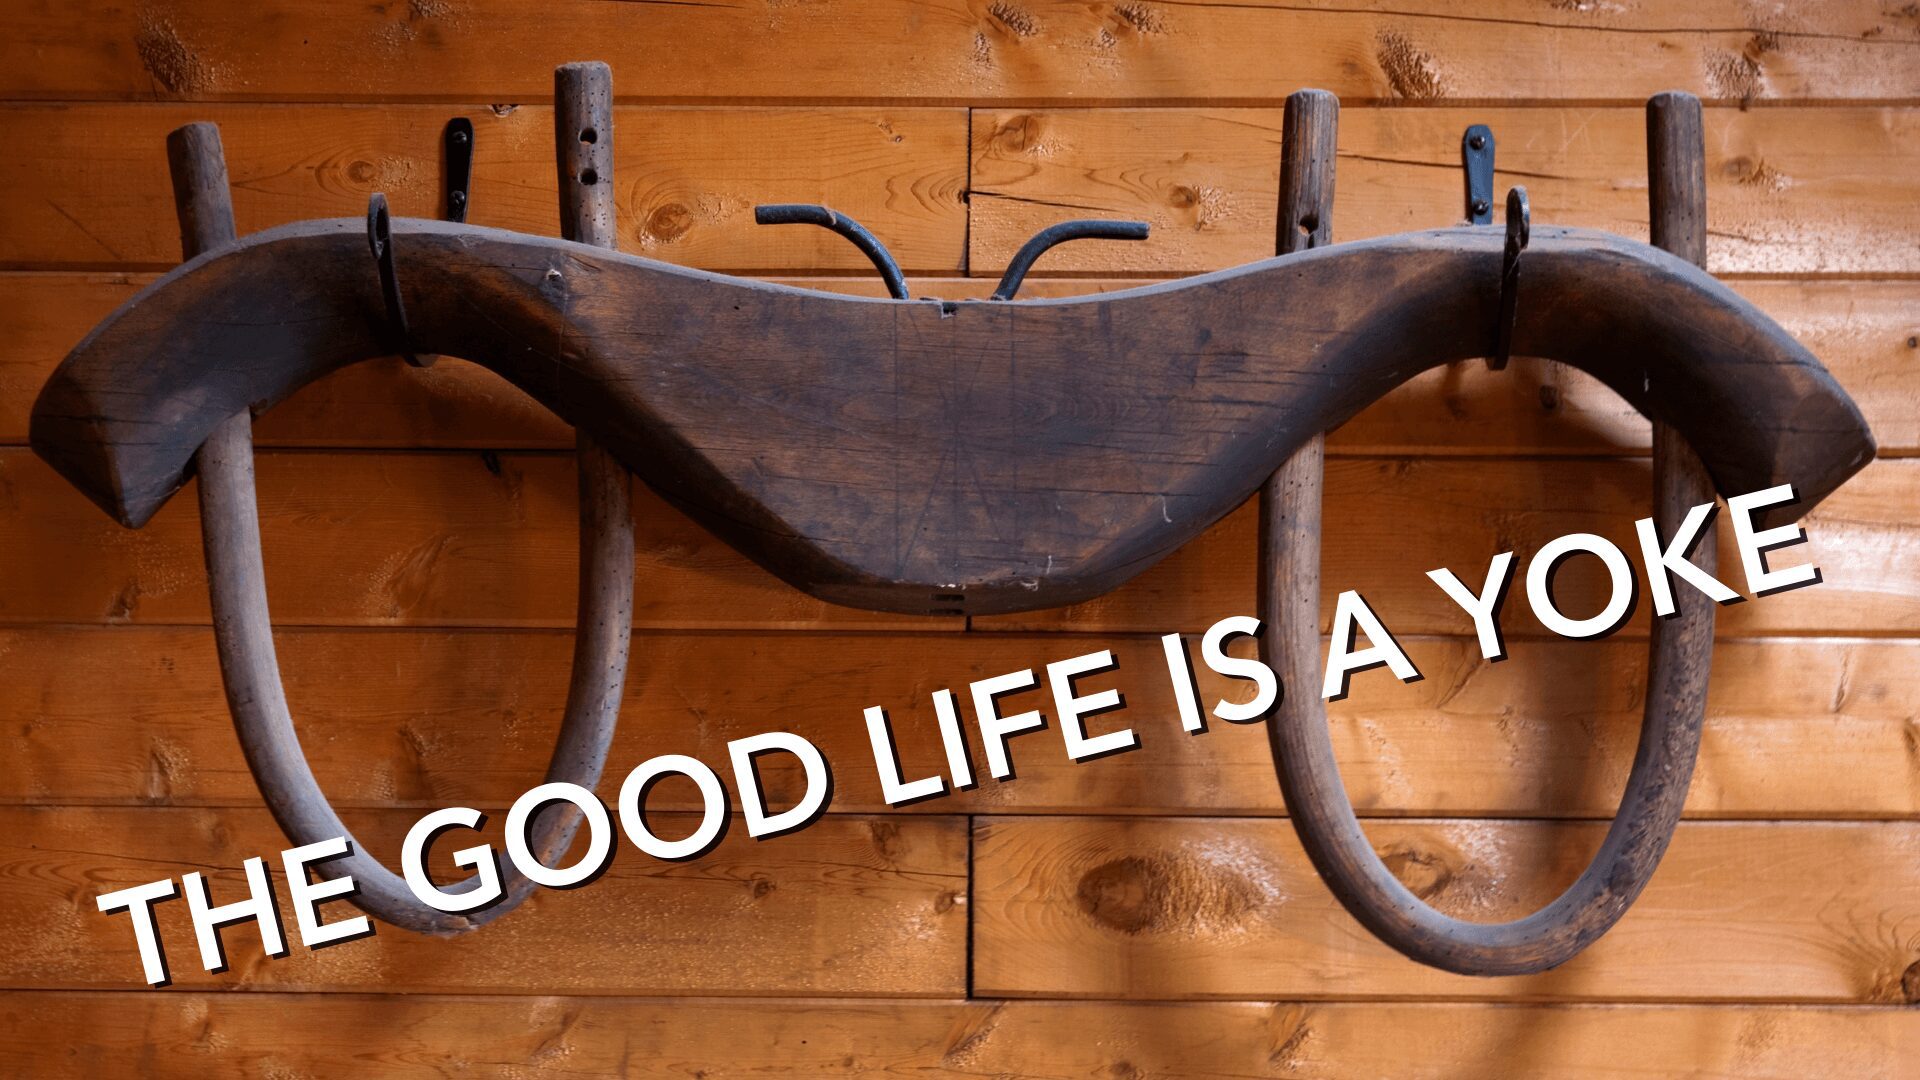 Featured image for “The Good Life is a Yoke.”